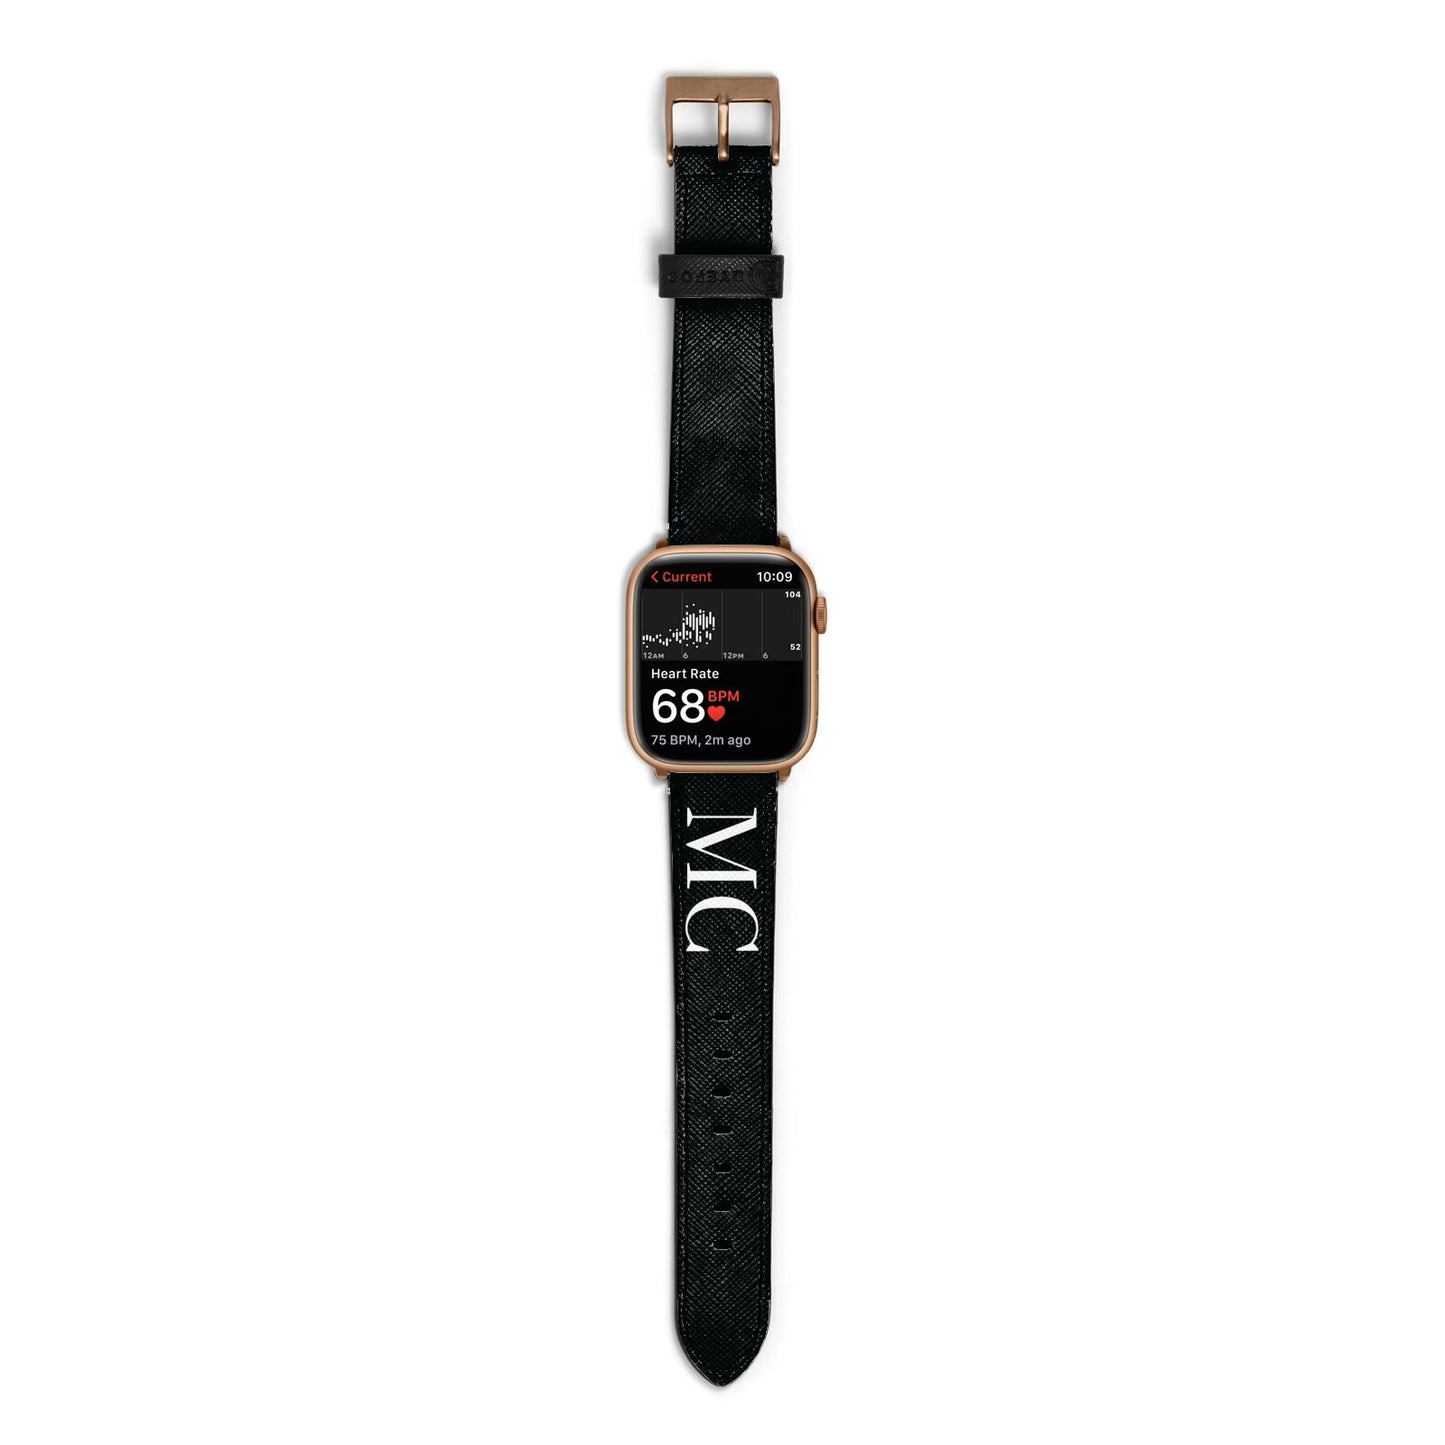 Initials Personalised 1 Apple Watch Strap Size 38mm with Gold Hardware